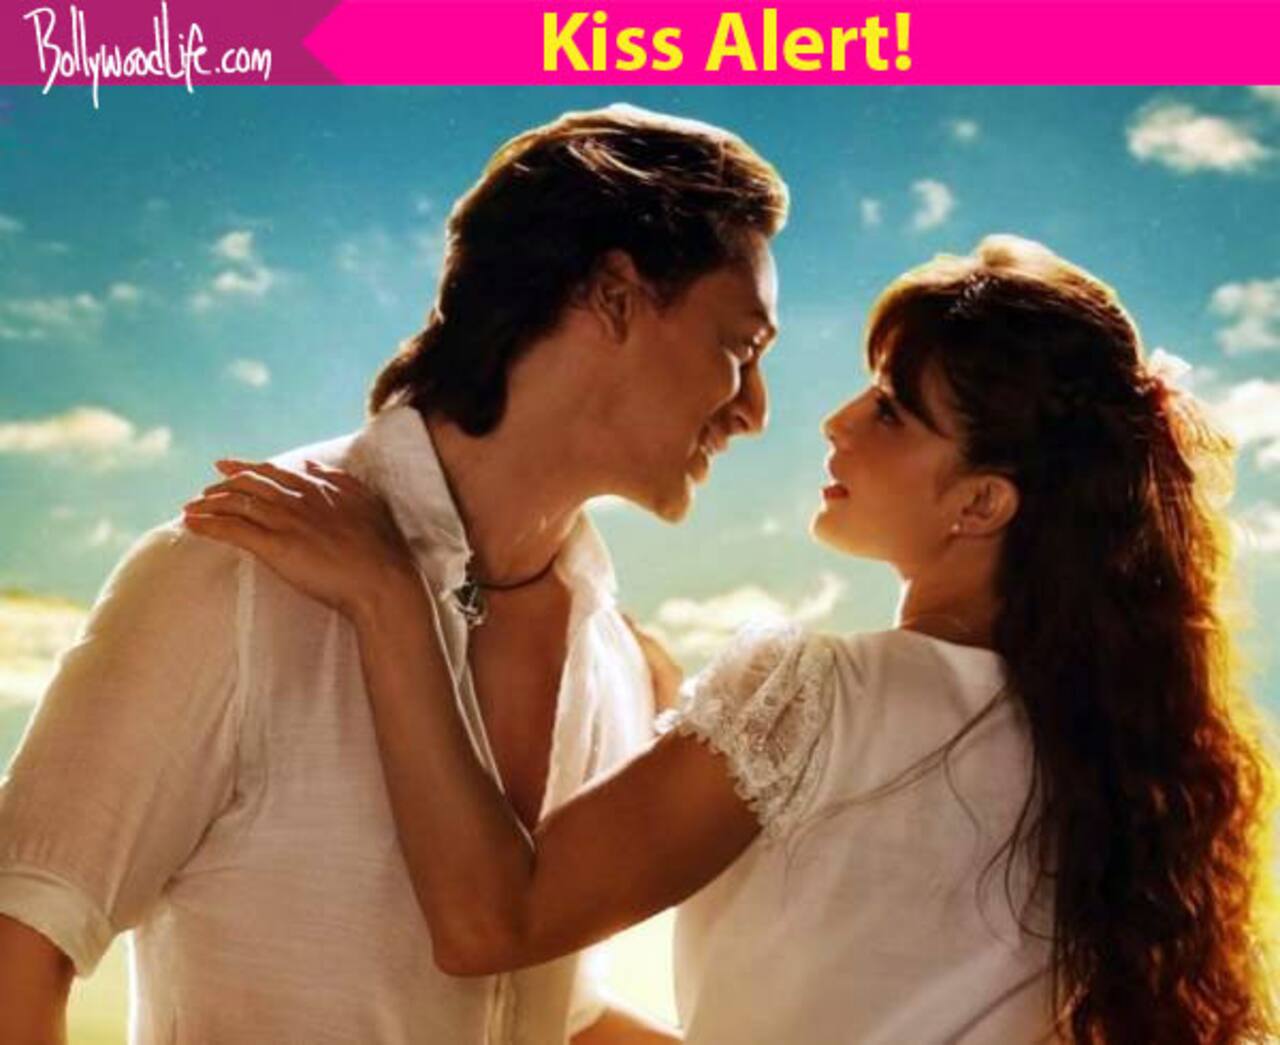 Director says CUT! but Jacqueline Fernandez and Tiger Shroff continue to kiss on the sets of A Flying Jatt